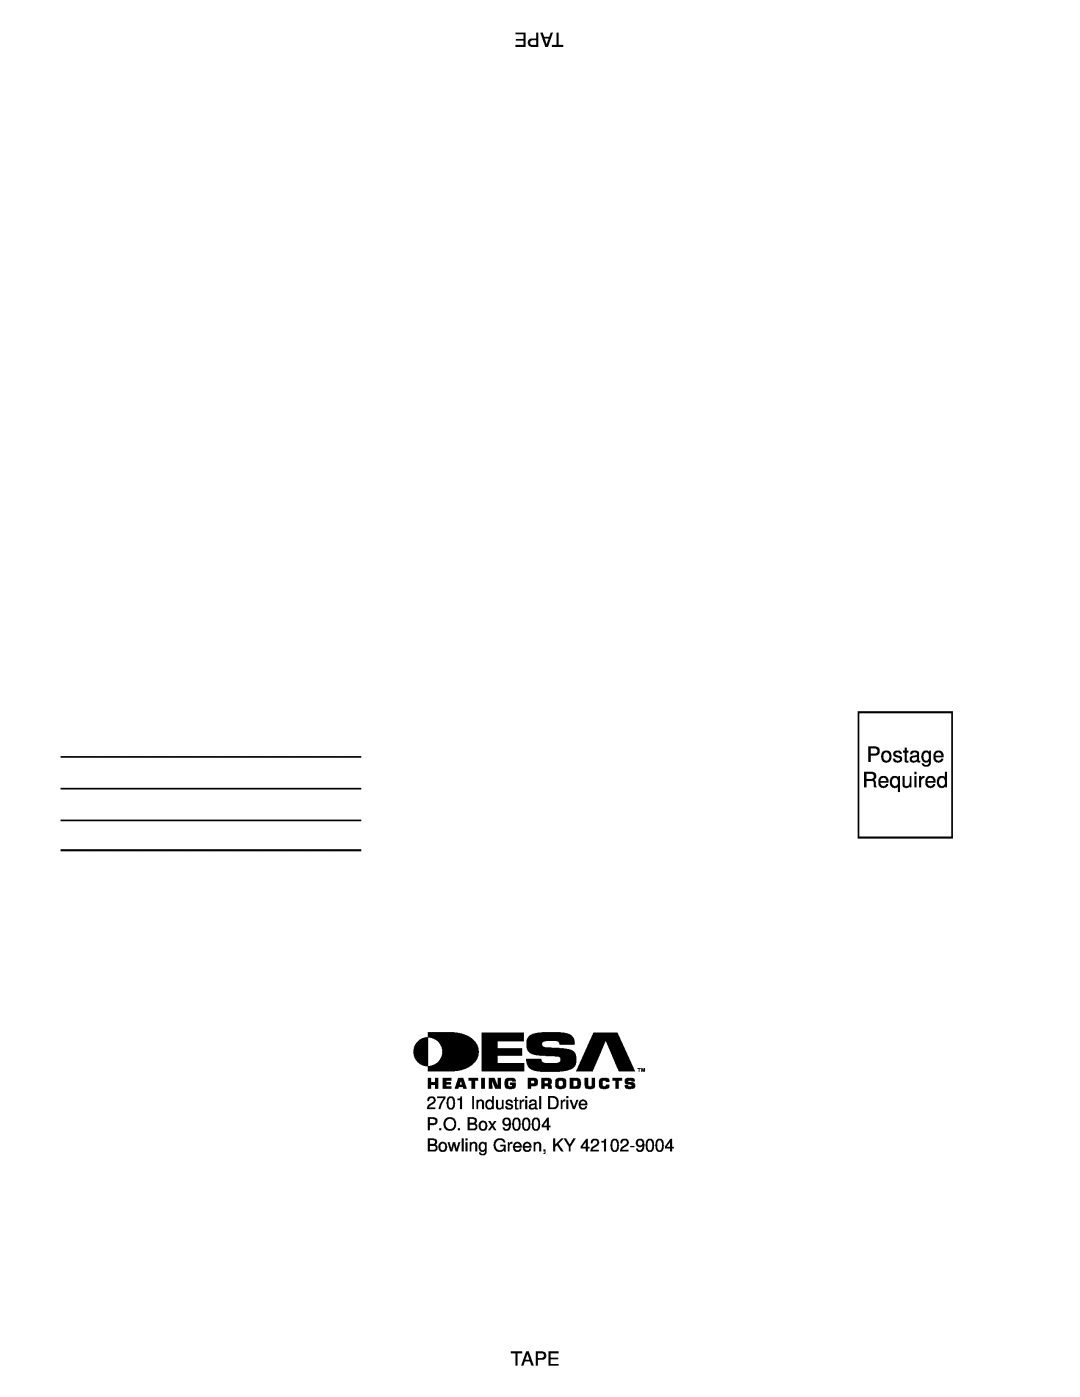 Desa ROPANE CONSTRUCTION CONVECTION HEATER owner manual Postage Required, Tape, Industrial Drive P.O. Box Bowling Green, KY 